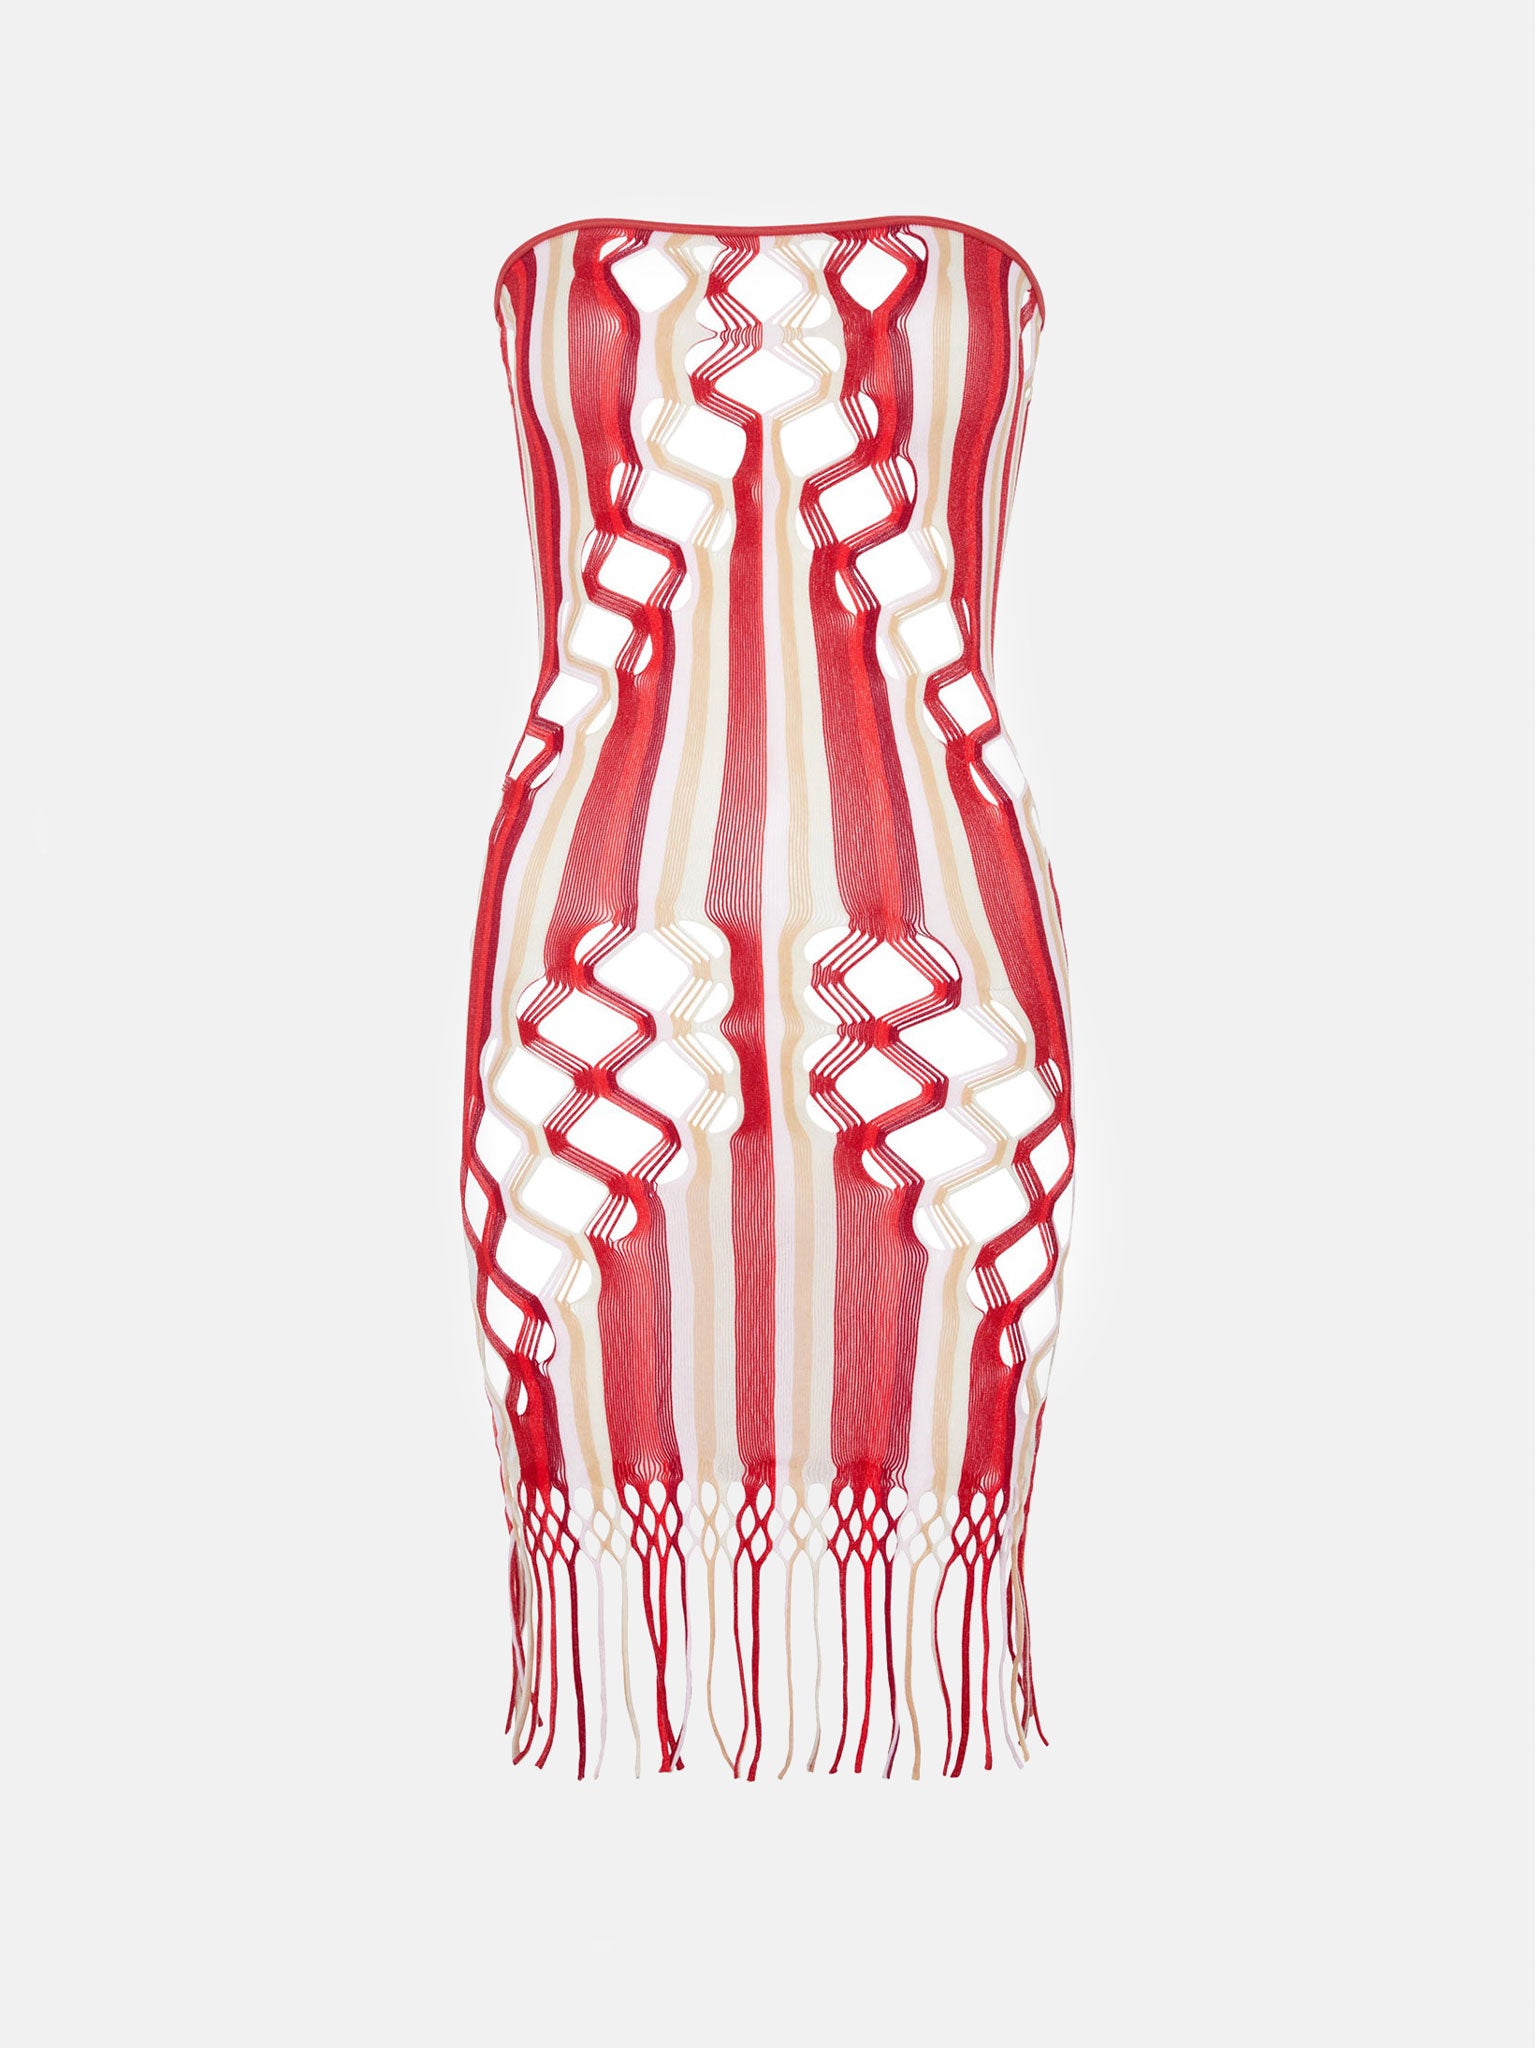 Haze Cut-Out Bodycon Mini Dress In Red Stripe | POSTER GIRL